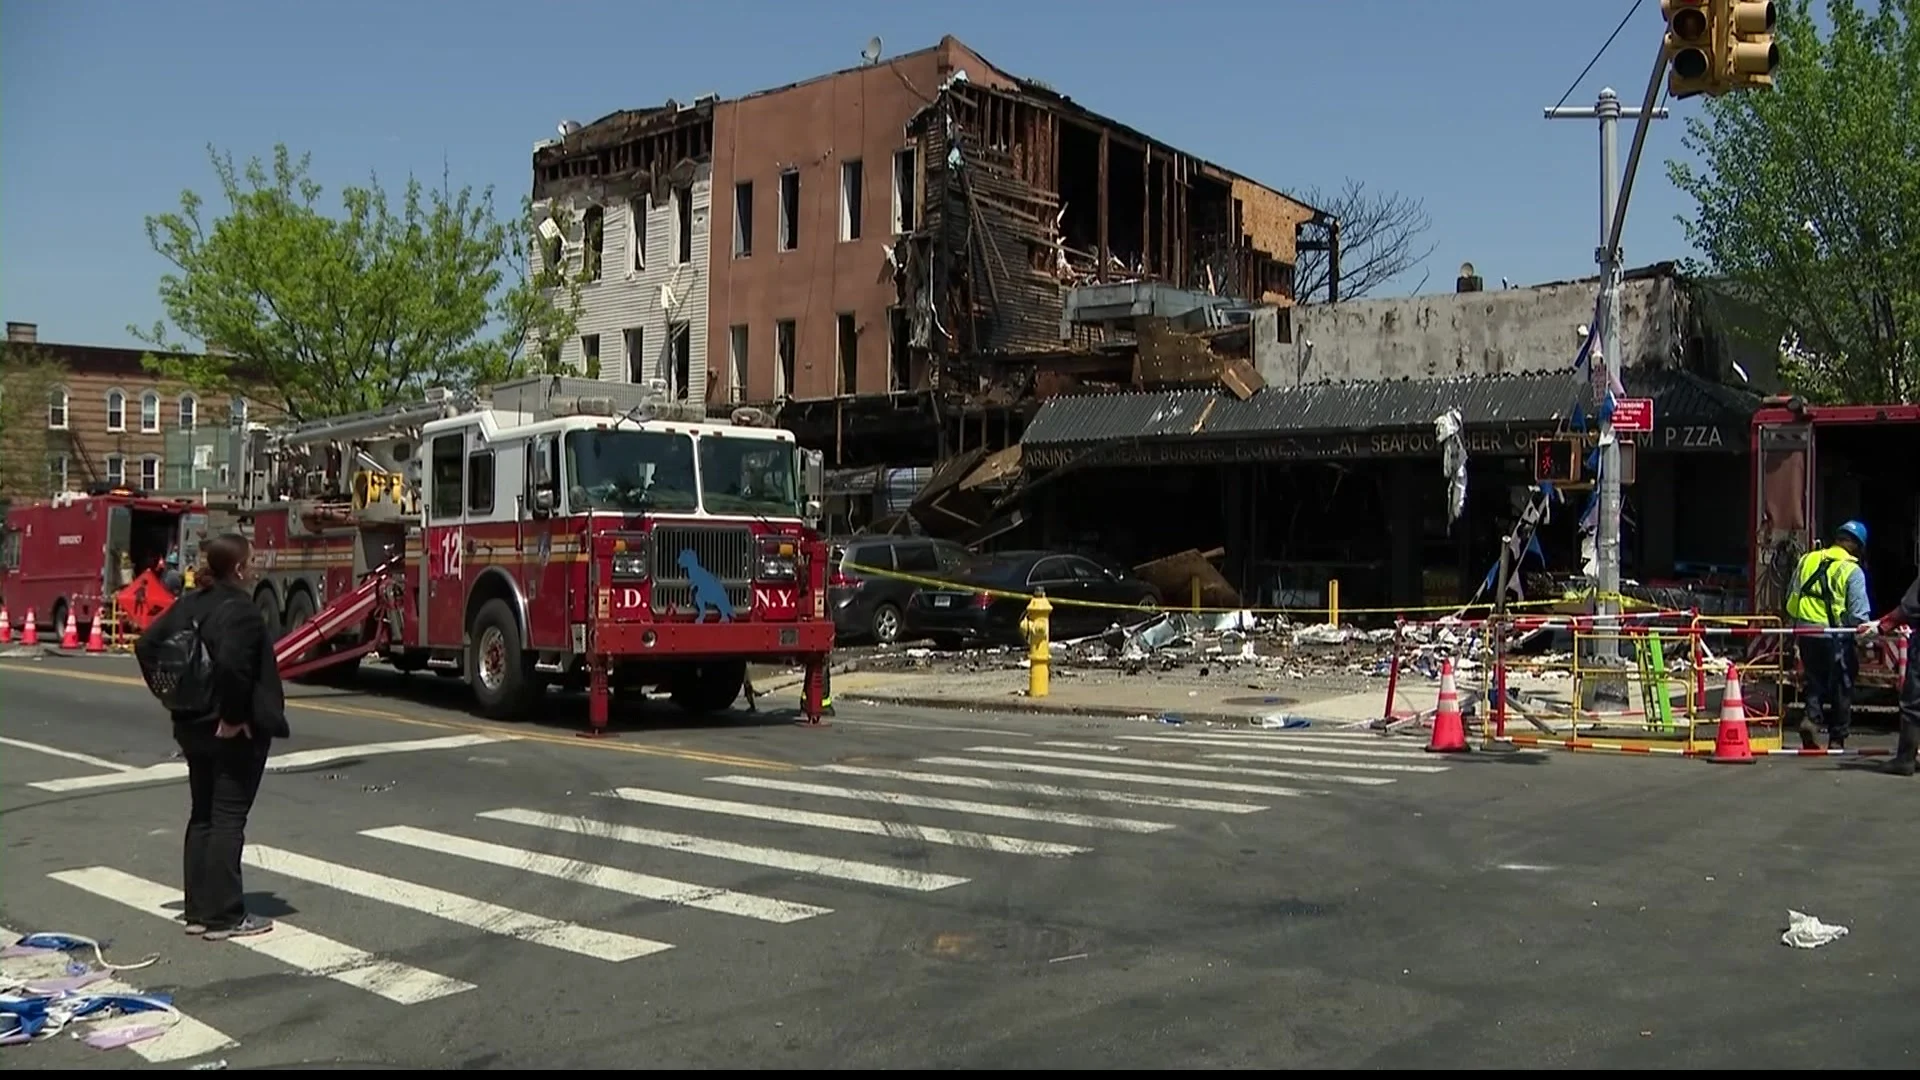 'We lost something good'. FDNY says large fire destroys Bushwick supermarket, leaves 55 people homeless